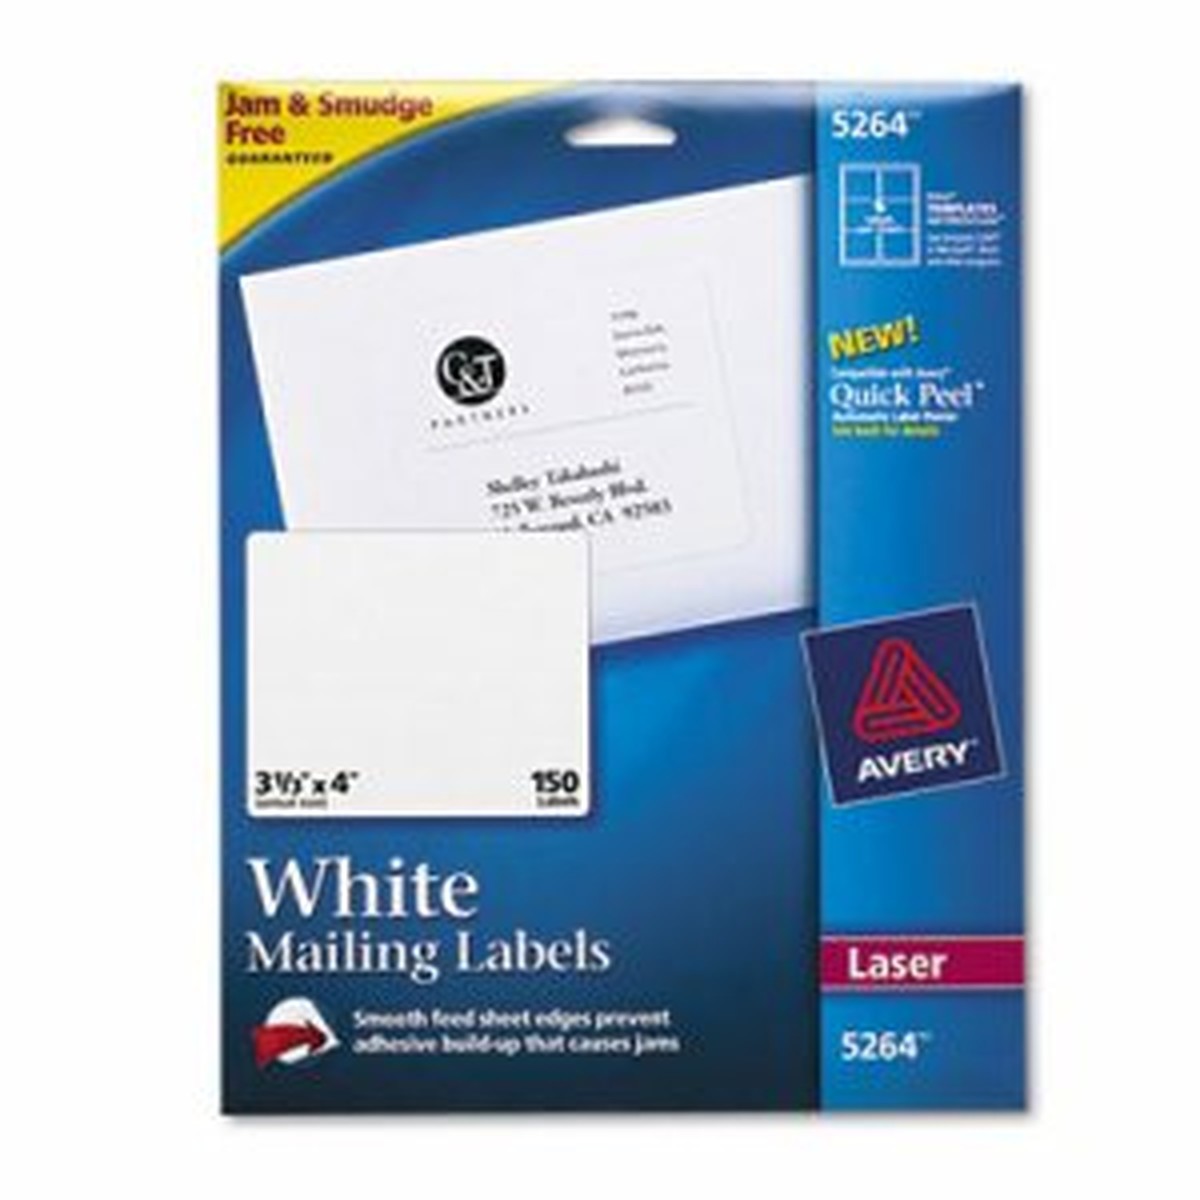 Shipping Labels with TrueBlock Technology, Laser, 3 1/3 x 4, White, 150/Pack